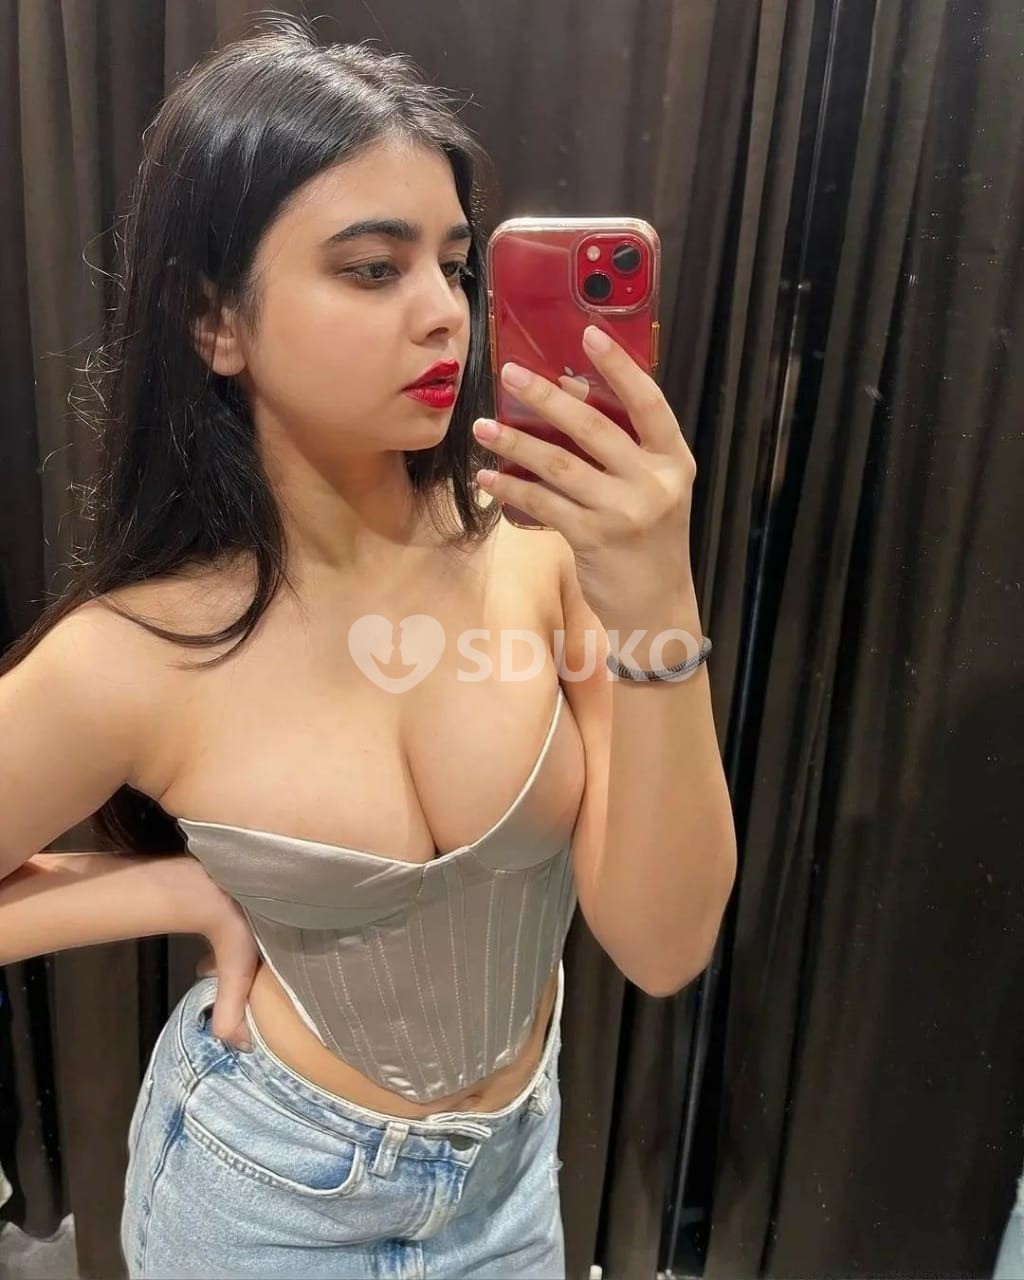 KONDAPUR VIP TODAY LOW PRICE 🛣️ &ESCORT 🥰SERVICE 100% SAFE AND SECURE ANYTIME CALL ME 24 X 7 SERVICE AVAILABLE 1